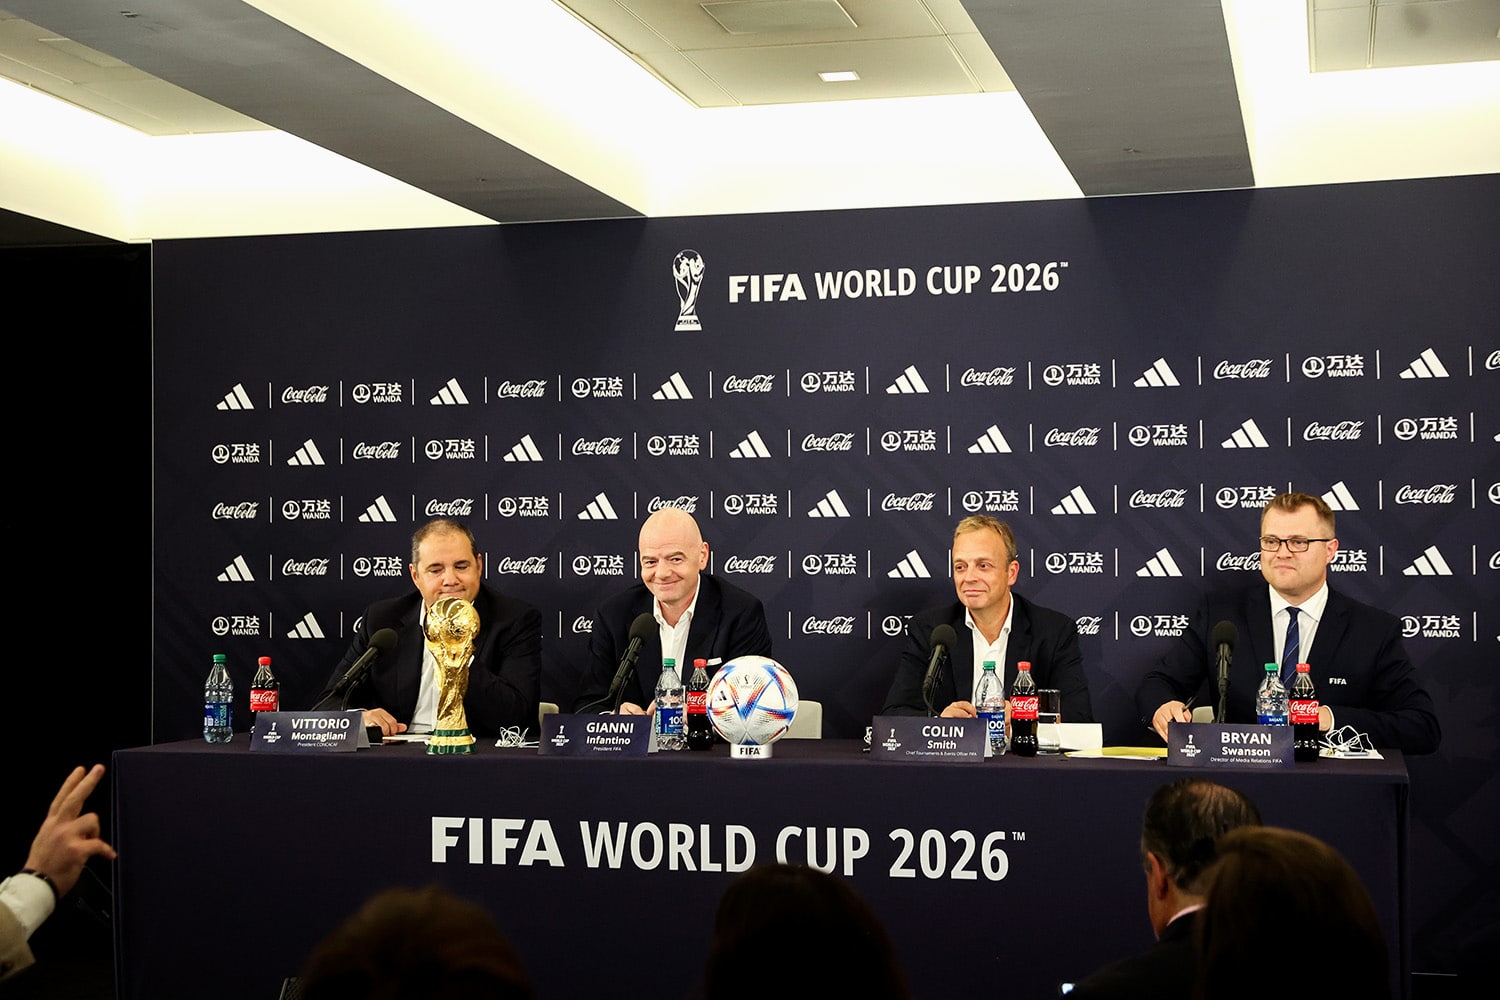 FIFA executives sit at a press conference for the World Cup 2026, which will be co-hosted by the U.S., Canada, and Mexico.